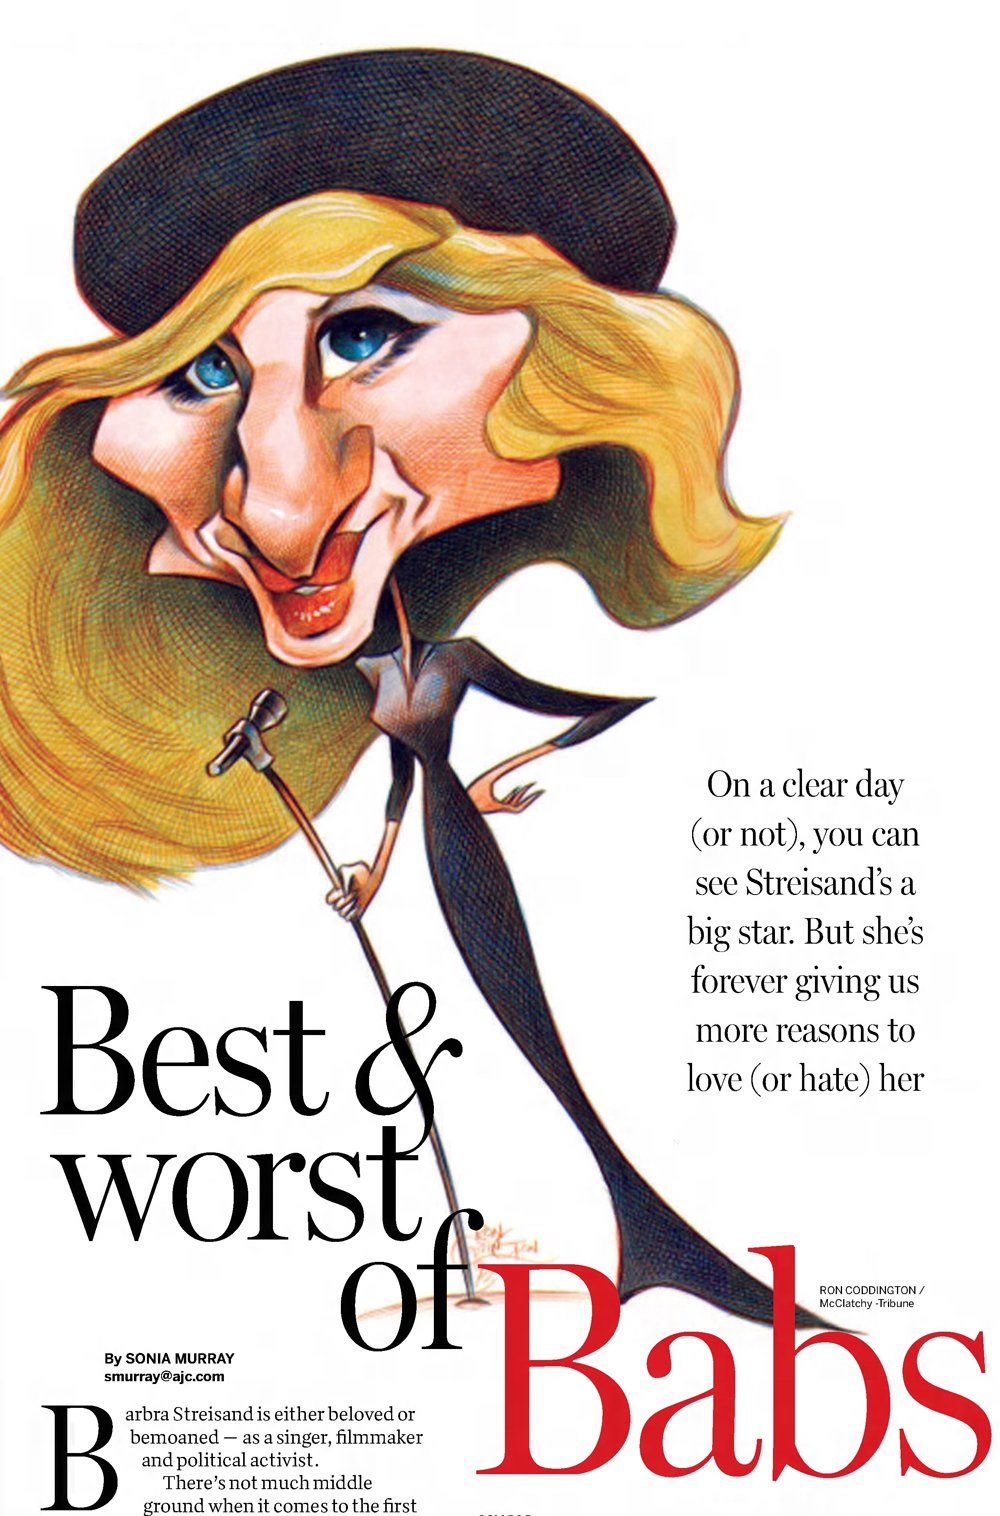 Atlanta newspaper illustration and story about Streisand.